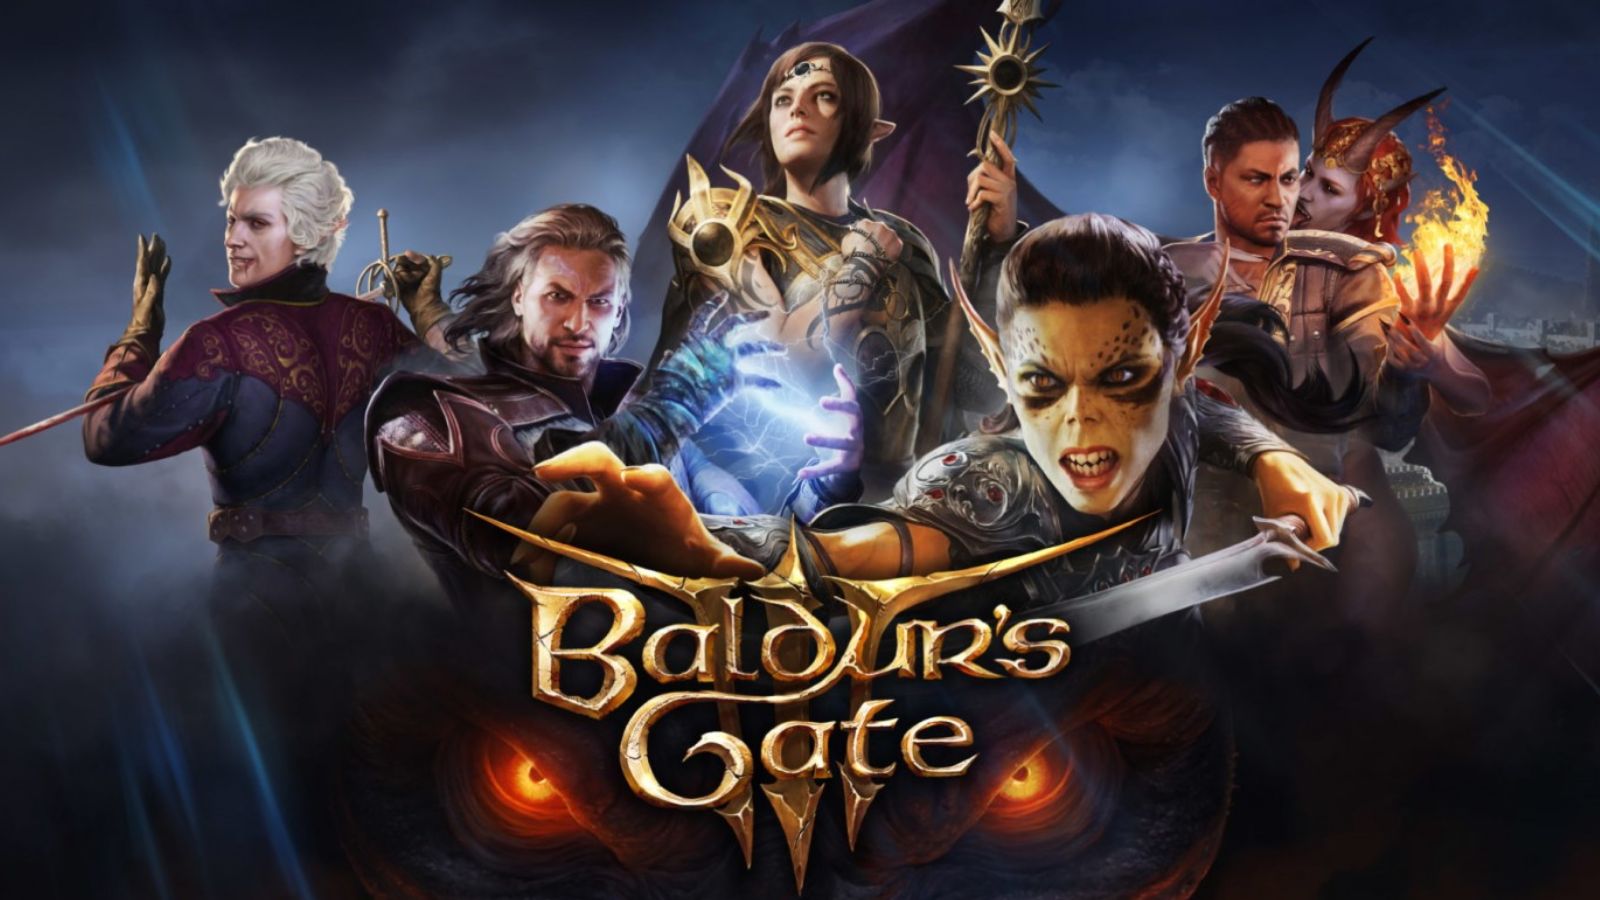 Where to find your Baldur's Gate 3 deluxe edition items